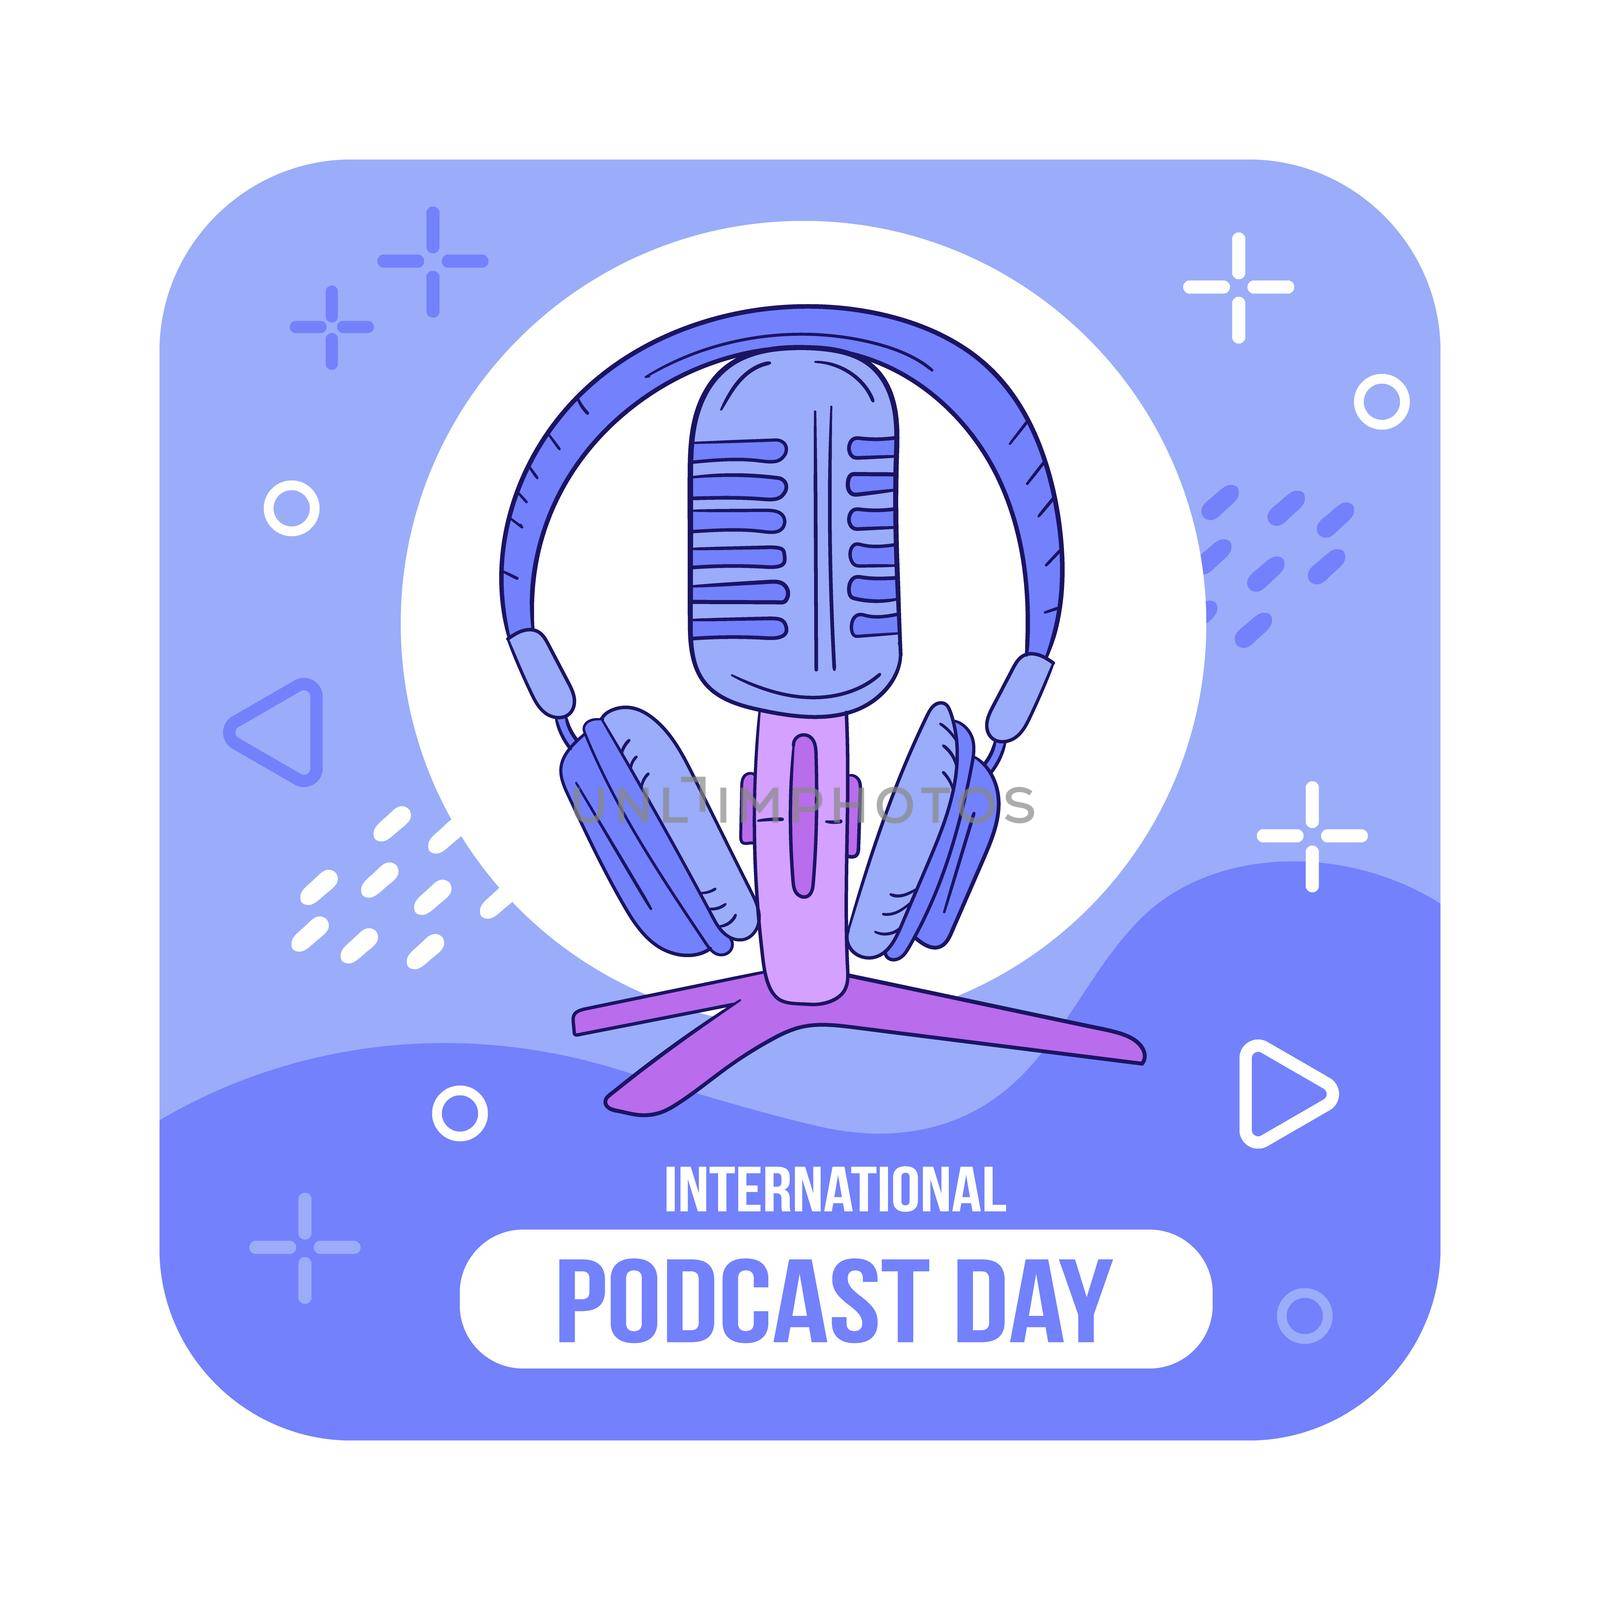 Vector illustration on the theme of International Podcast Day on September 30th. Microphone and headphones in hand drawn style